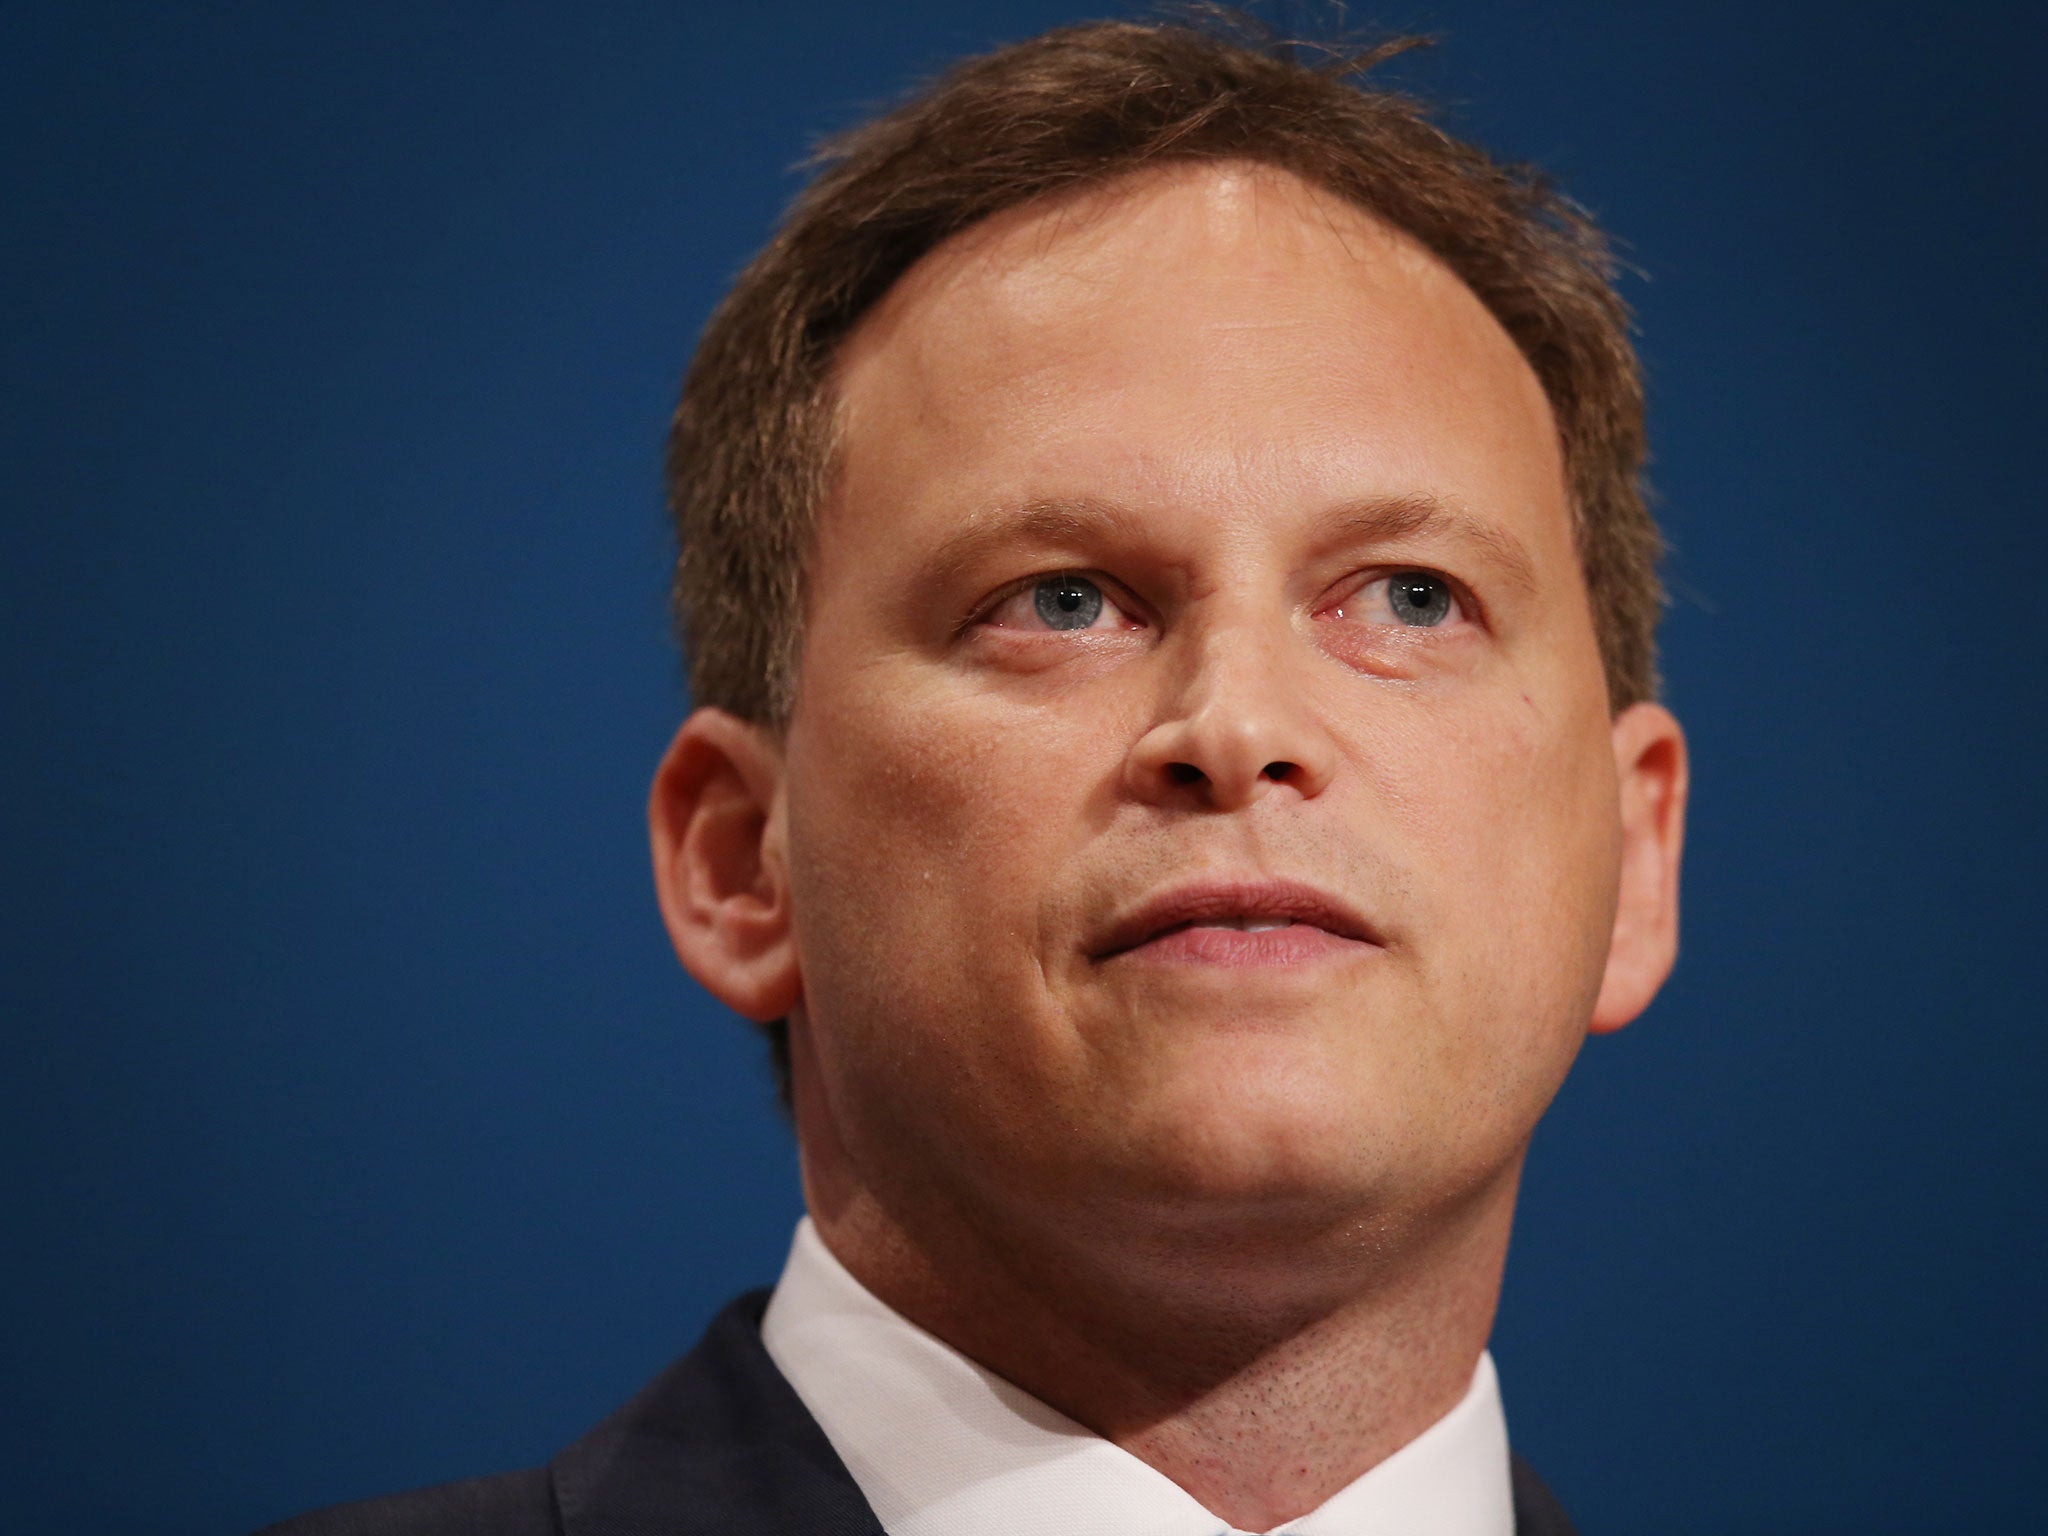 Grant Shapps says all Conservative MPs have discussed if Theresa May has a future